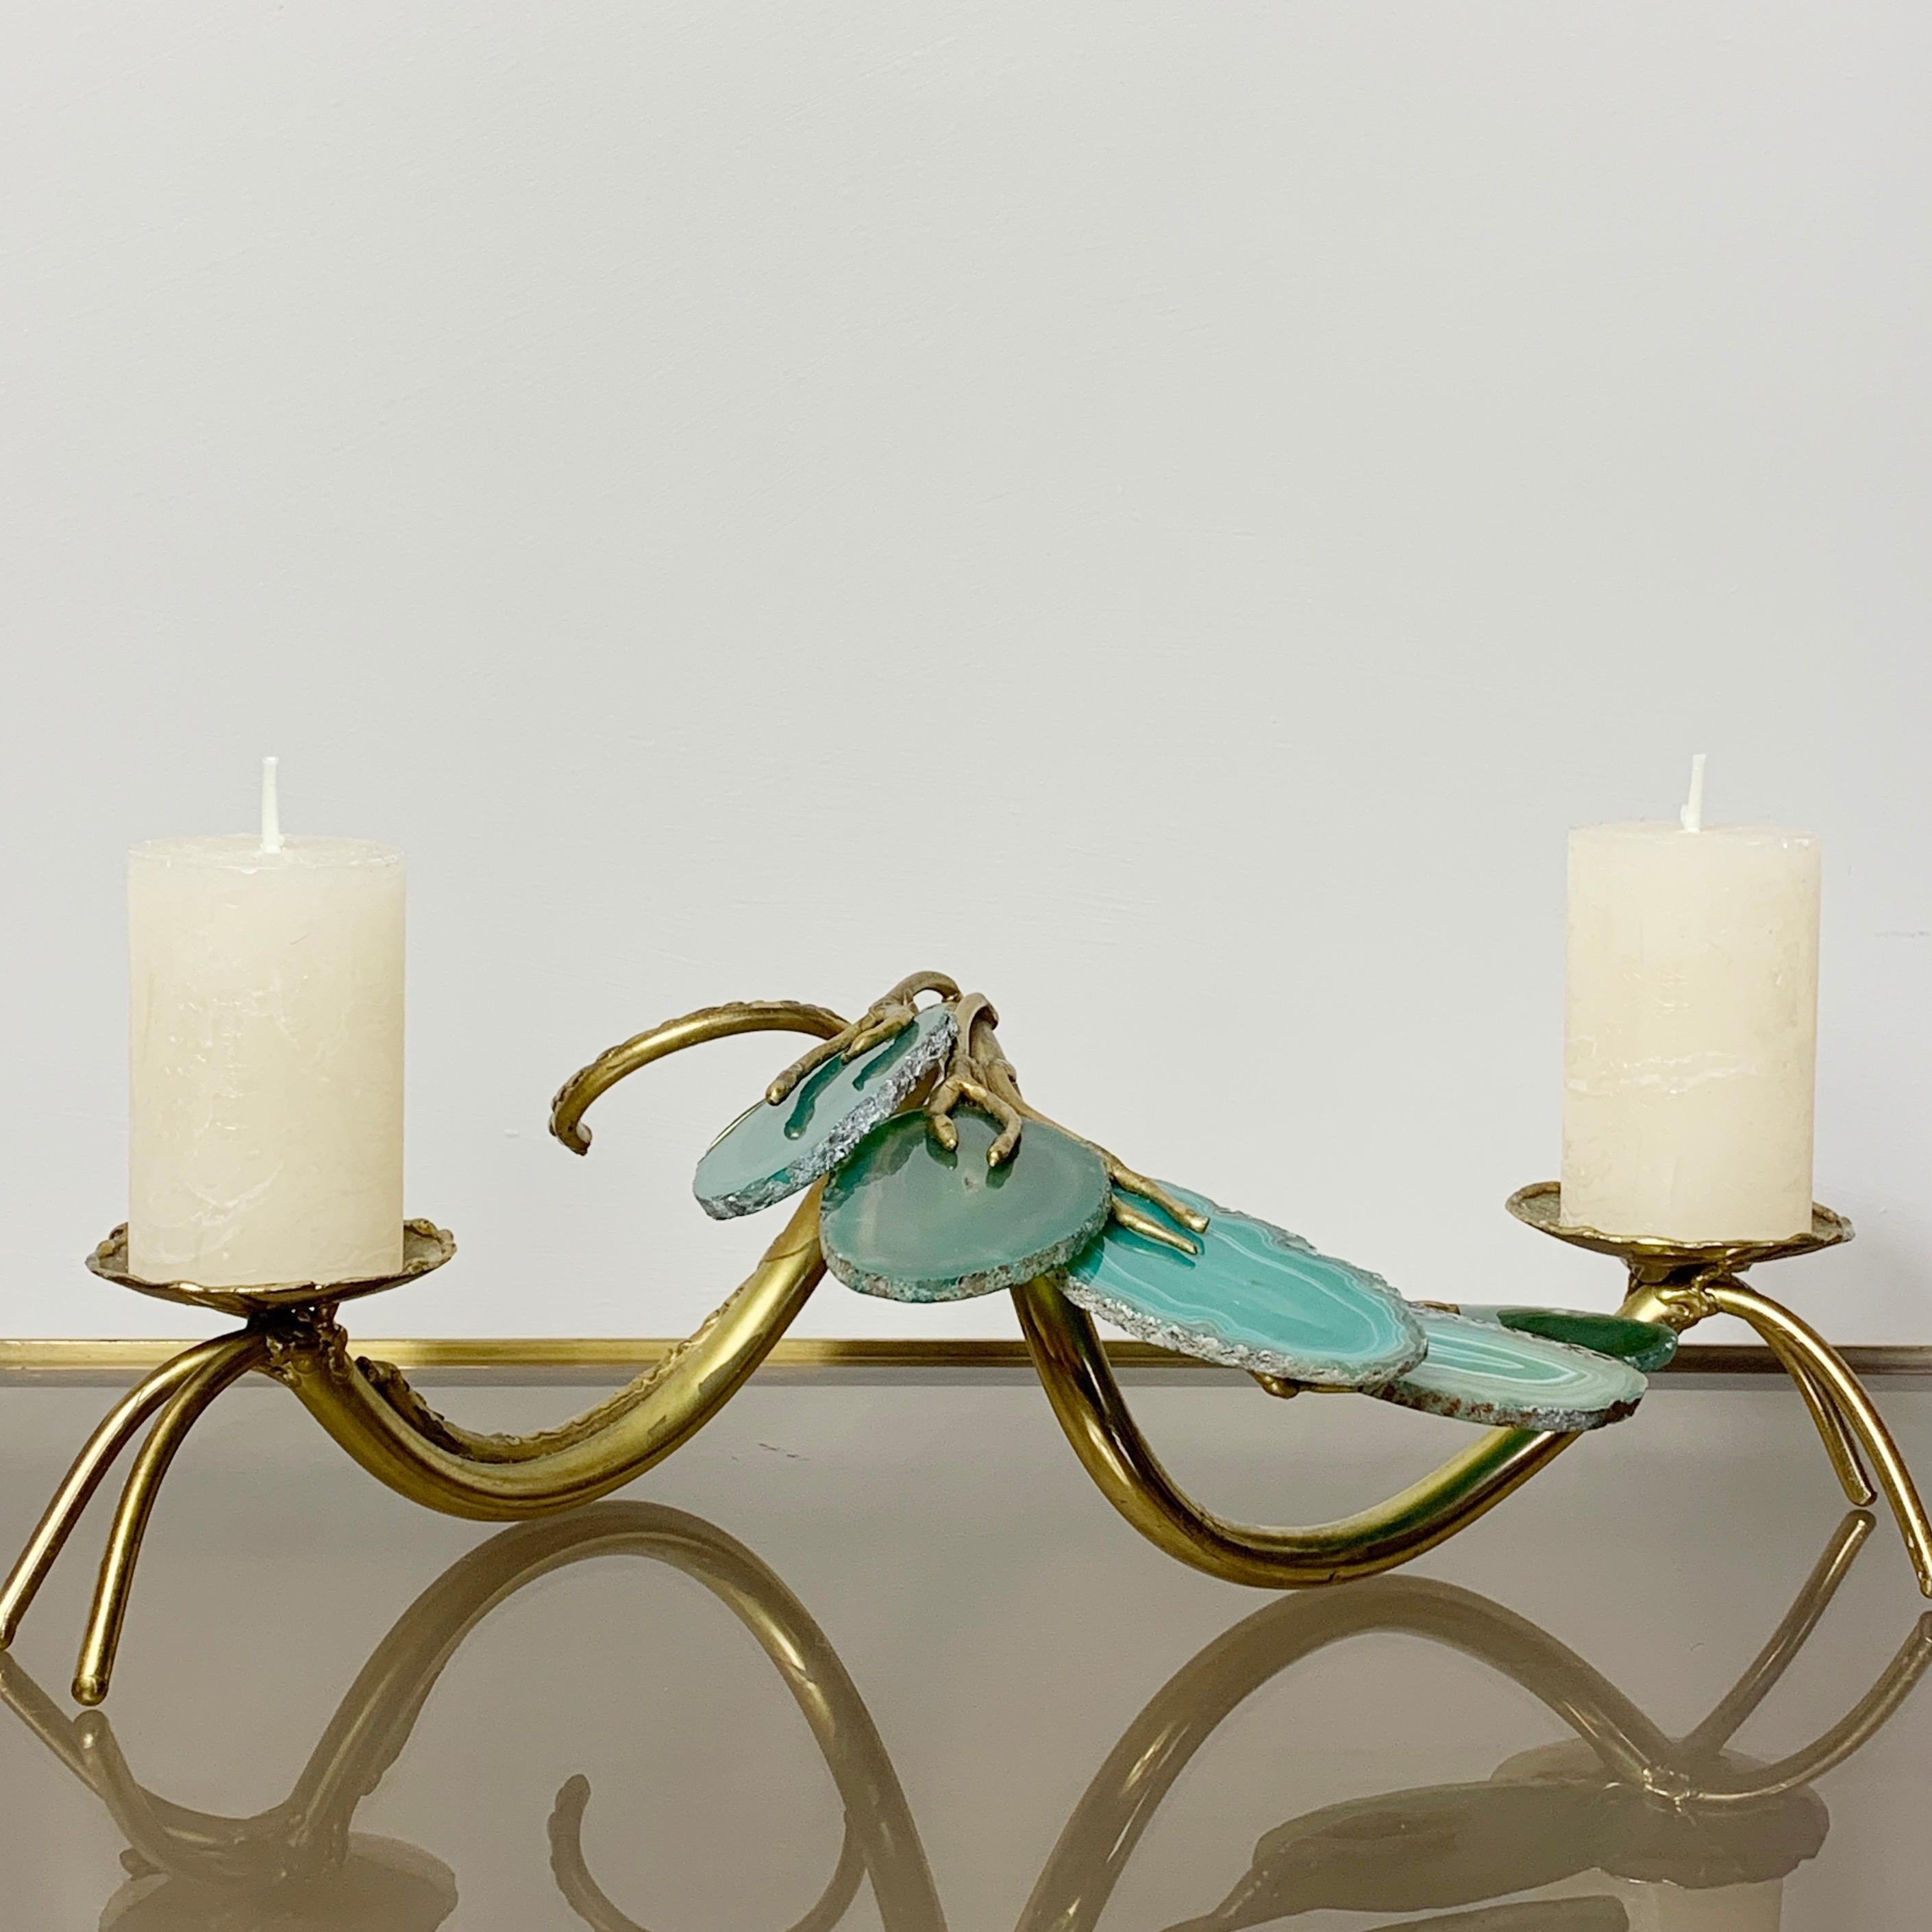 Brass candleholder, Att Duval Brasseur
1970s
Fabulous handcrafted brass stand with delicate natural agate leaves
the leaves are all individual in soft tones of green with stunning patterns throughout
39cm width, 11cm height, 21cm depth, candle